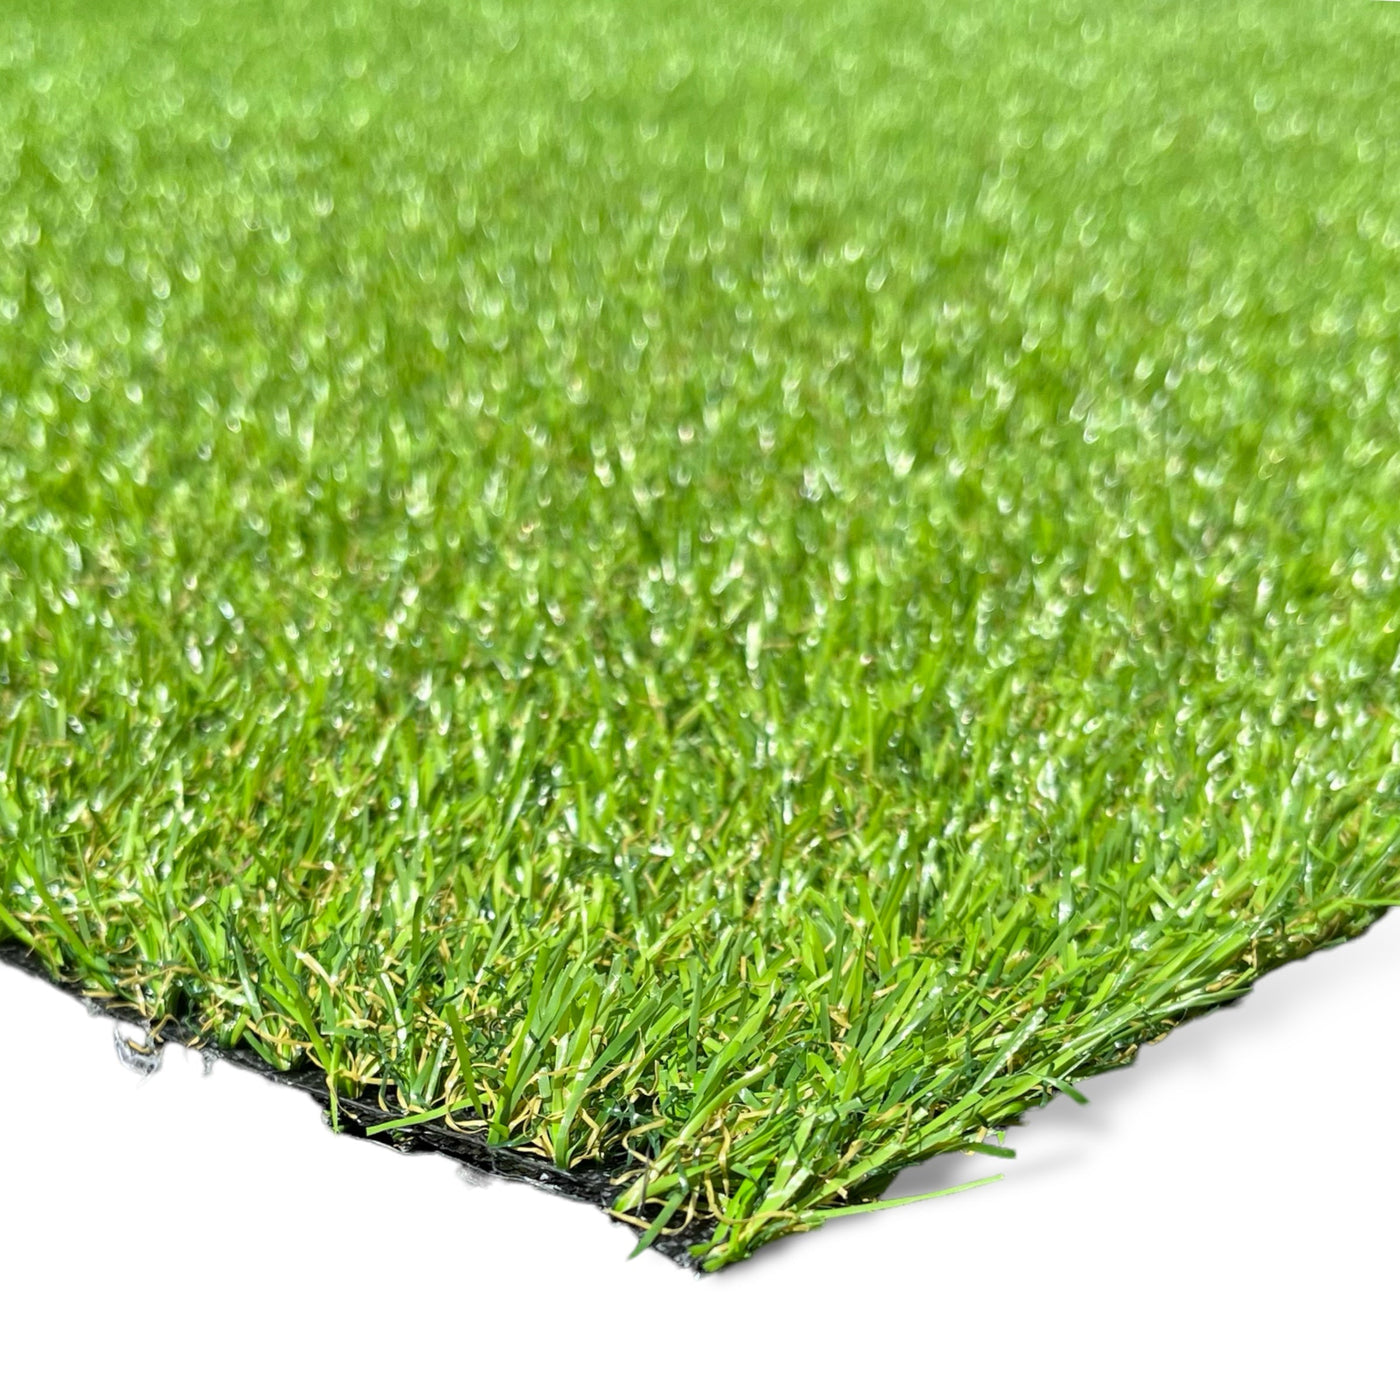 12ft Wide Event Synthetic Grass Rolls